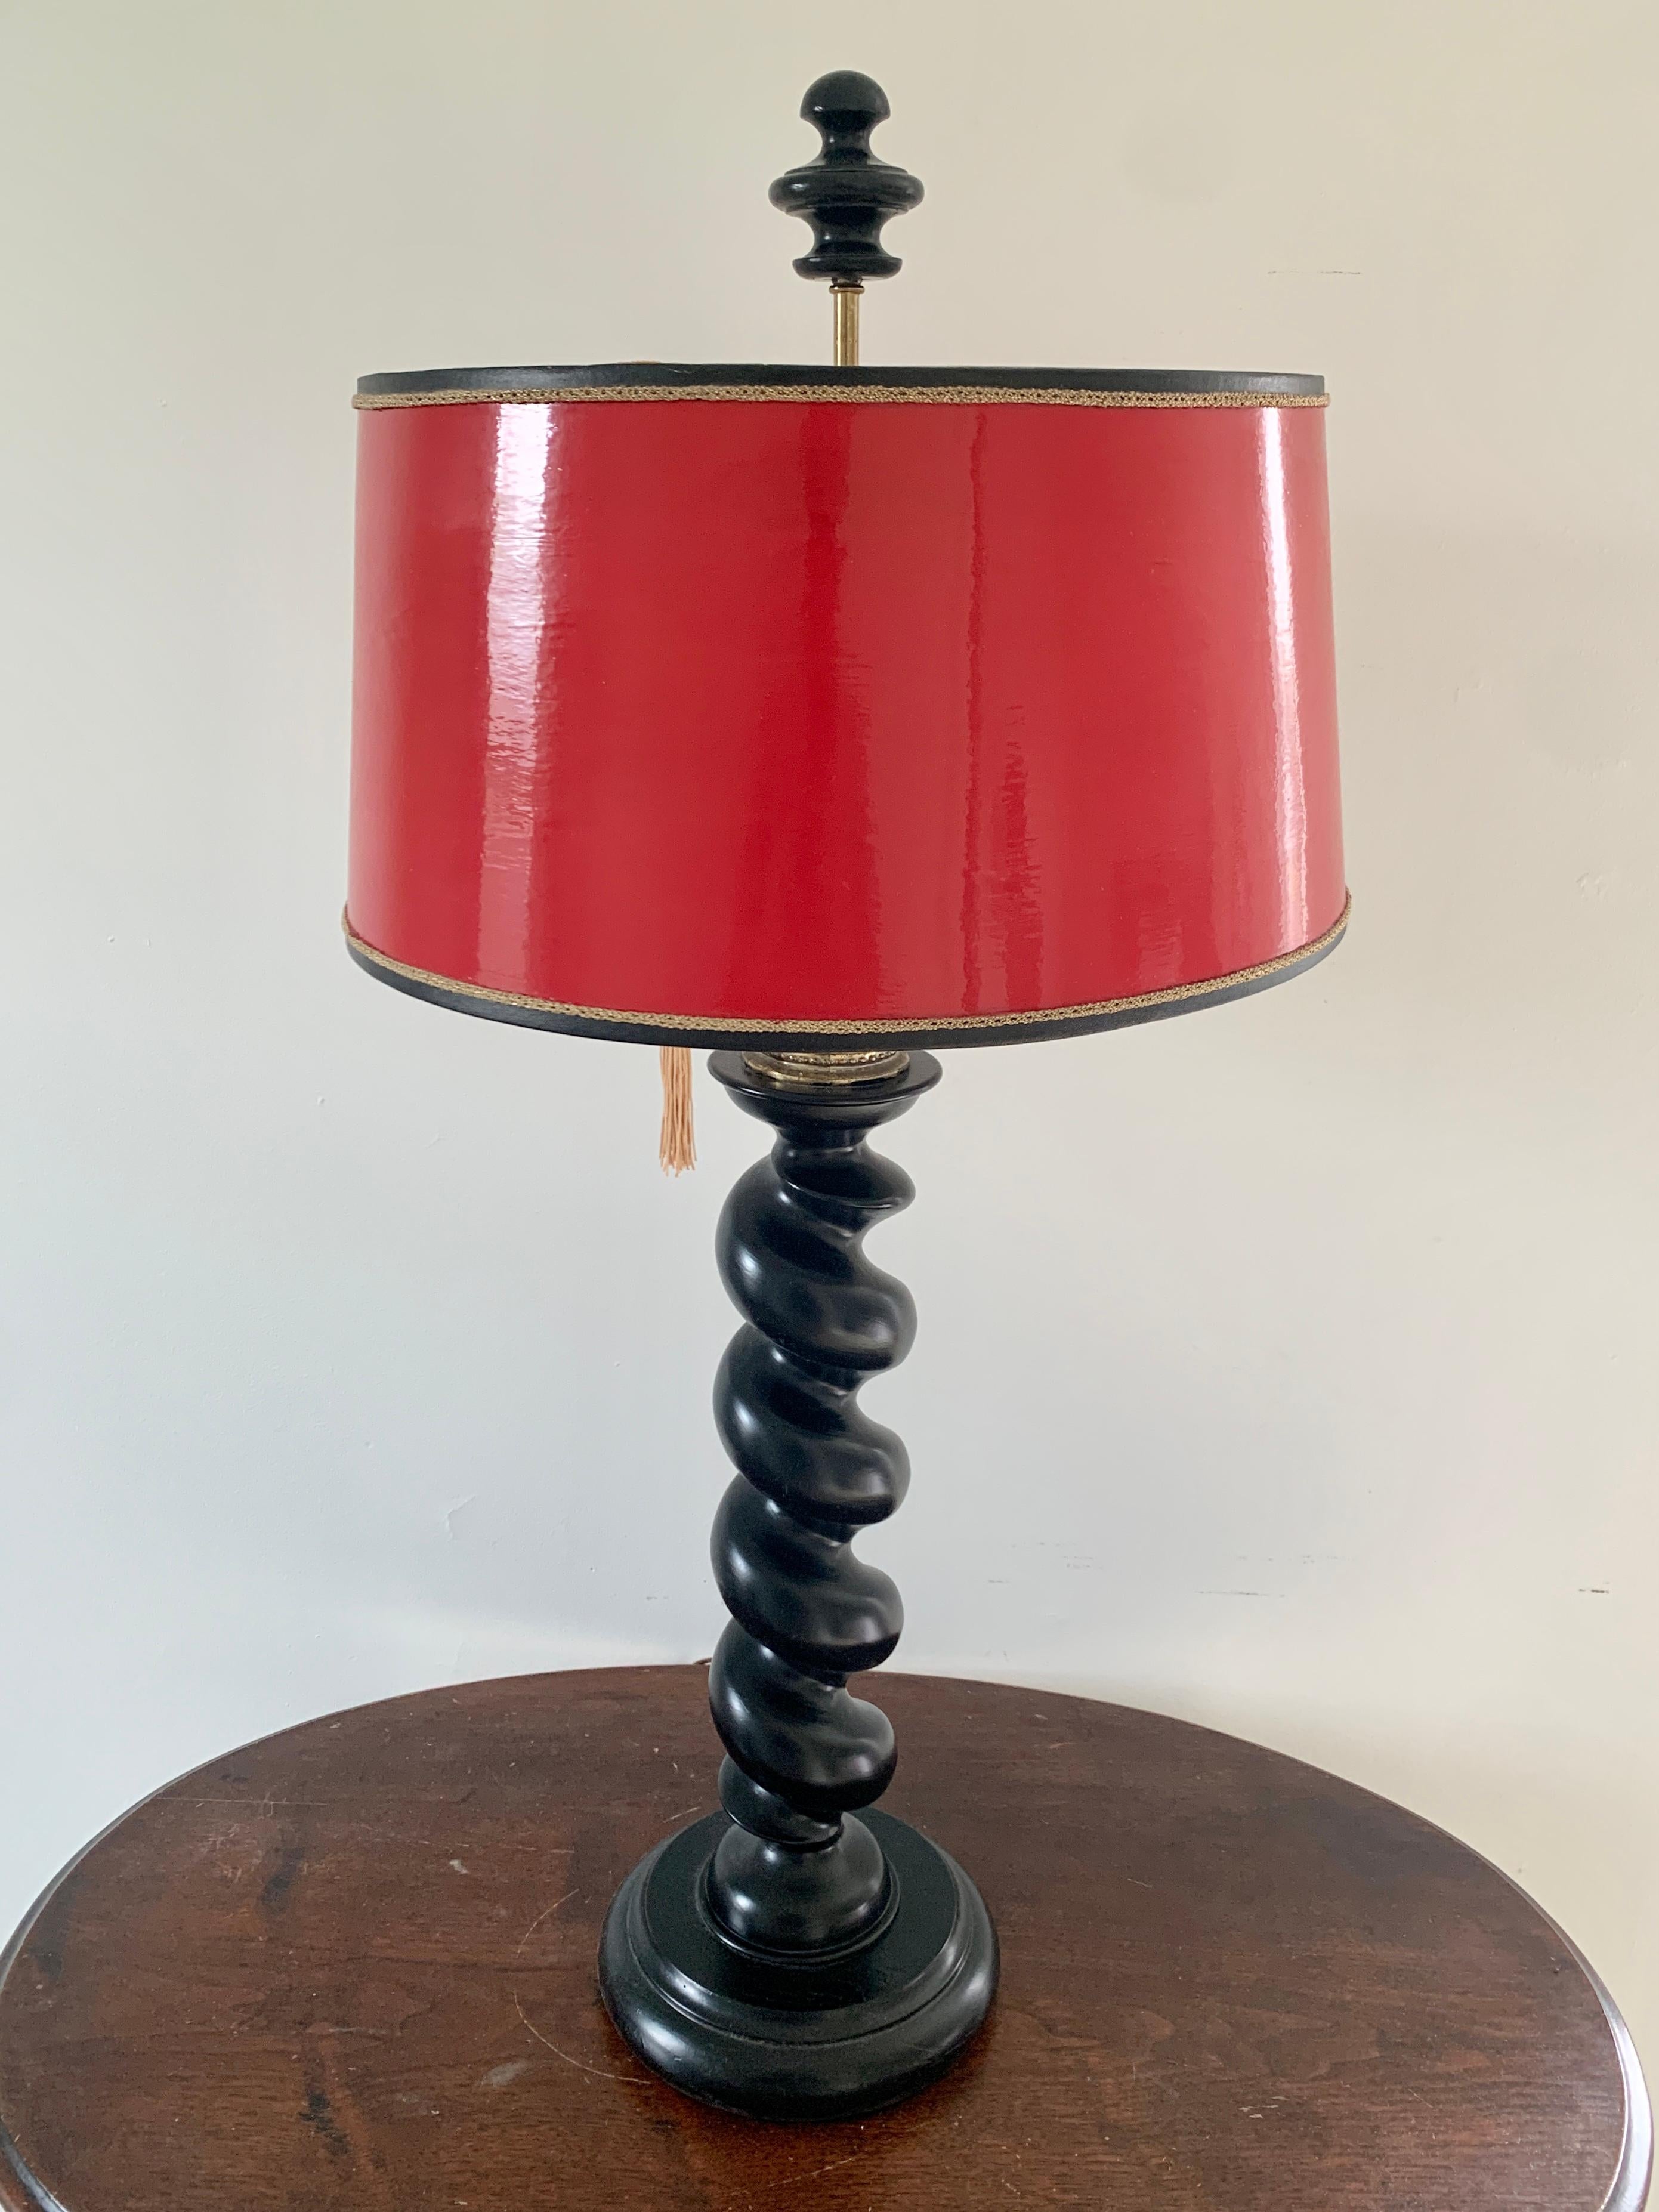 A gorgeous barley twist English style table lamp 

USA, Mid-20th Century

Ebonized oak, with red lacquered shade

Measures: 16